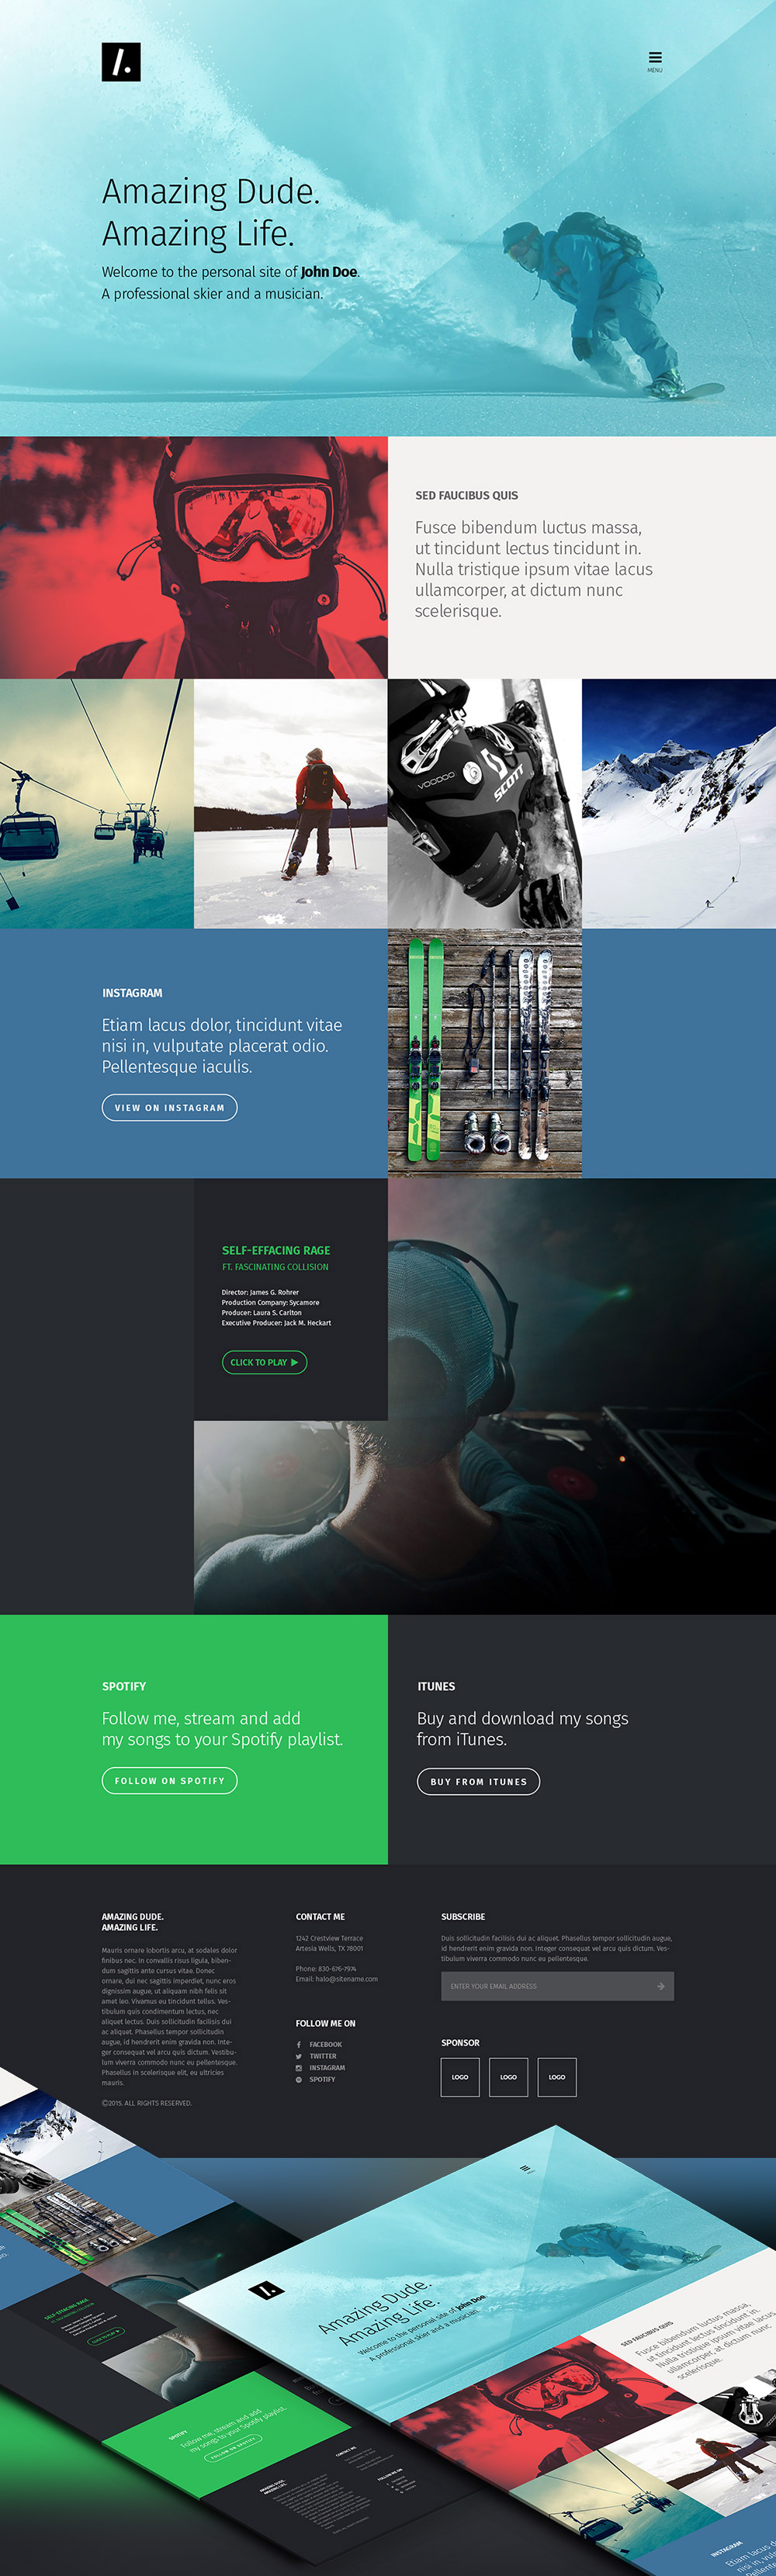 one-page-personal-portfolio-website-template-free-psd-download-download-psd